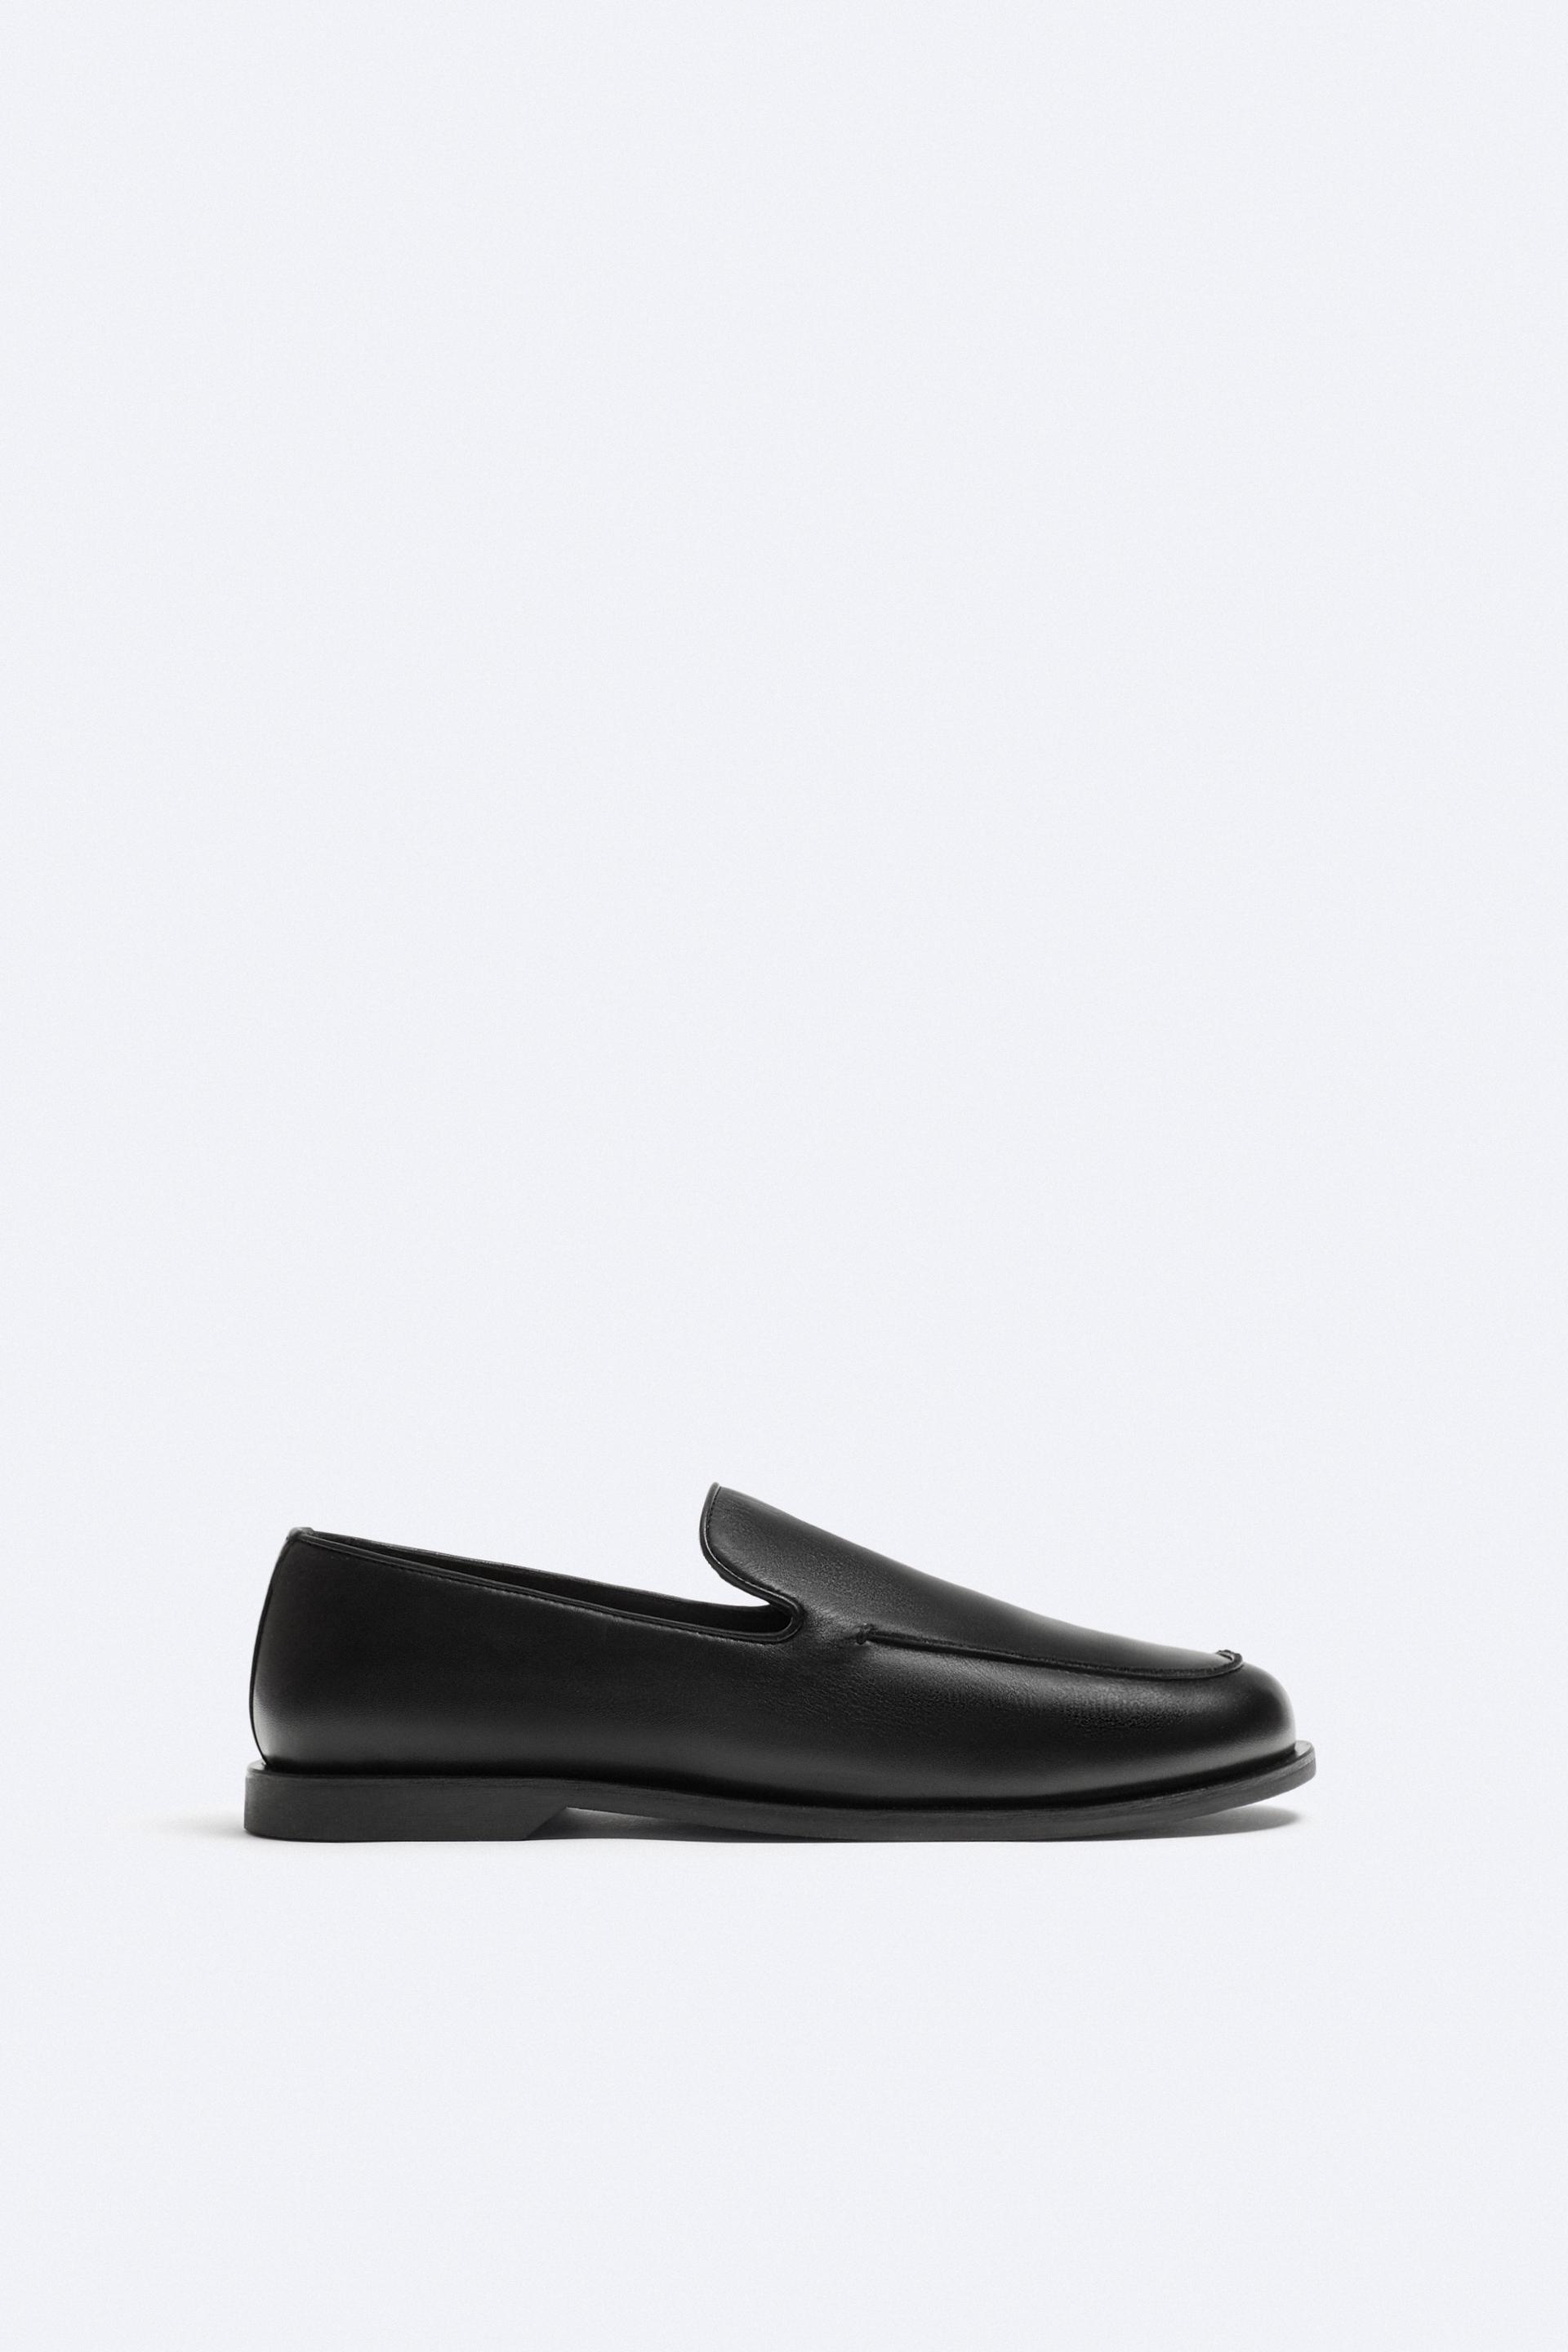 LEATHER LOAFERS LIMITED EDITION ZARA